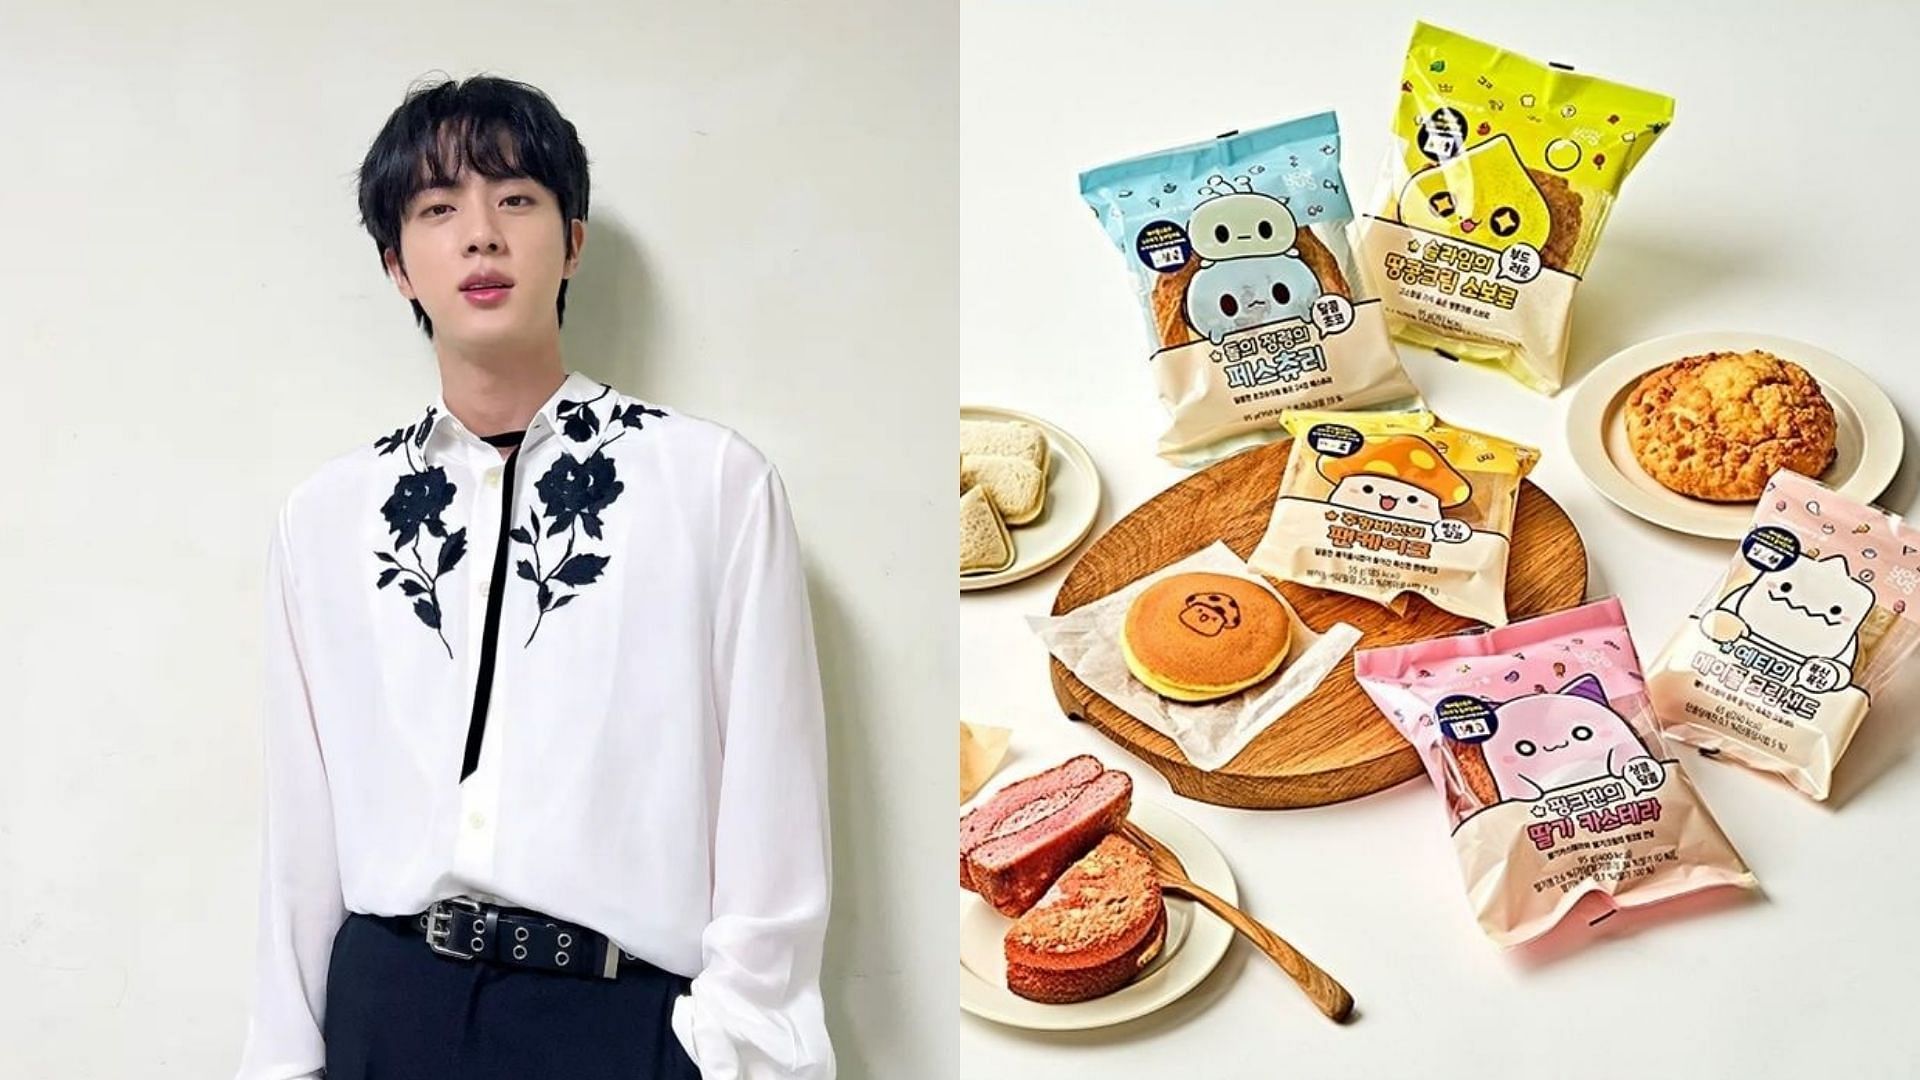 MapleStory character bread sold out after BTS&#039; Jin posted a picture (Images via @jin and gs25_official/Instagram)